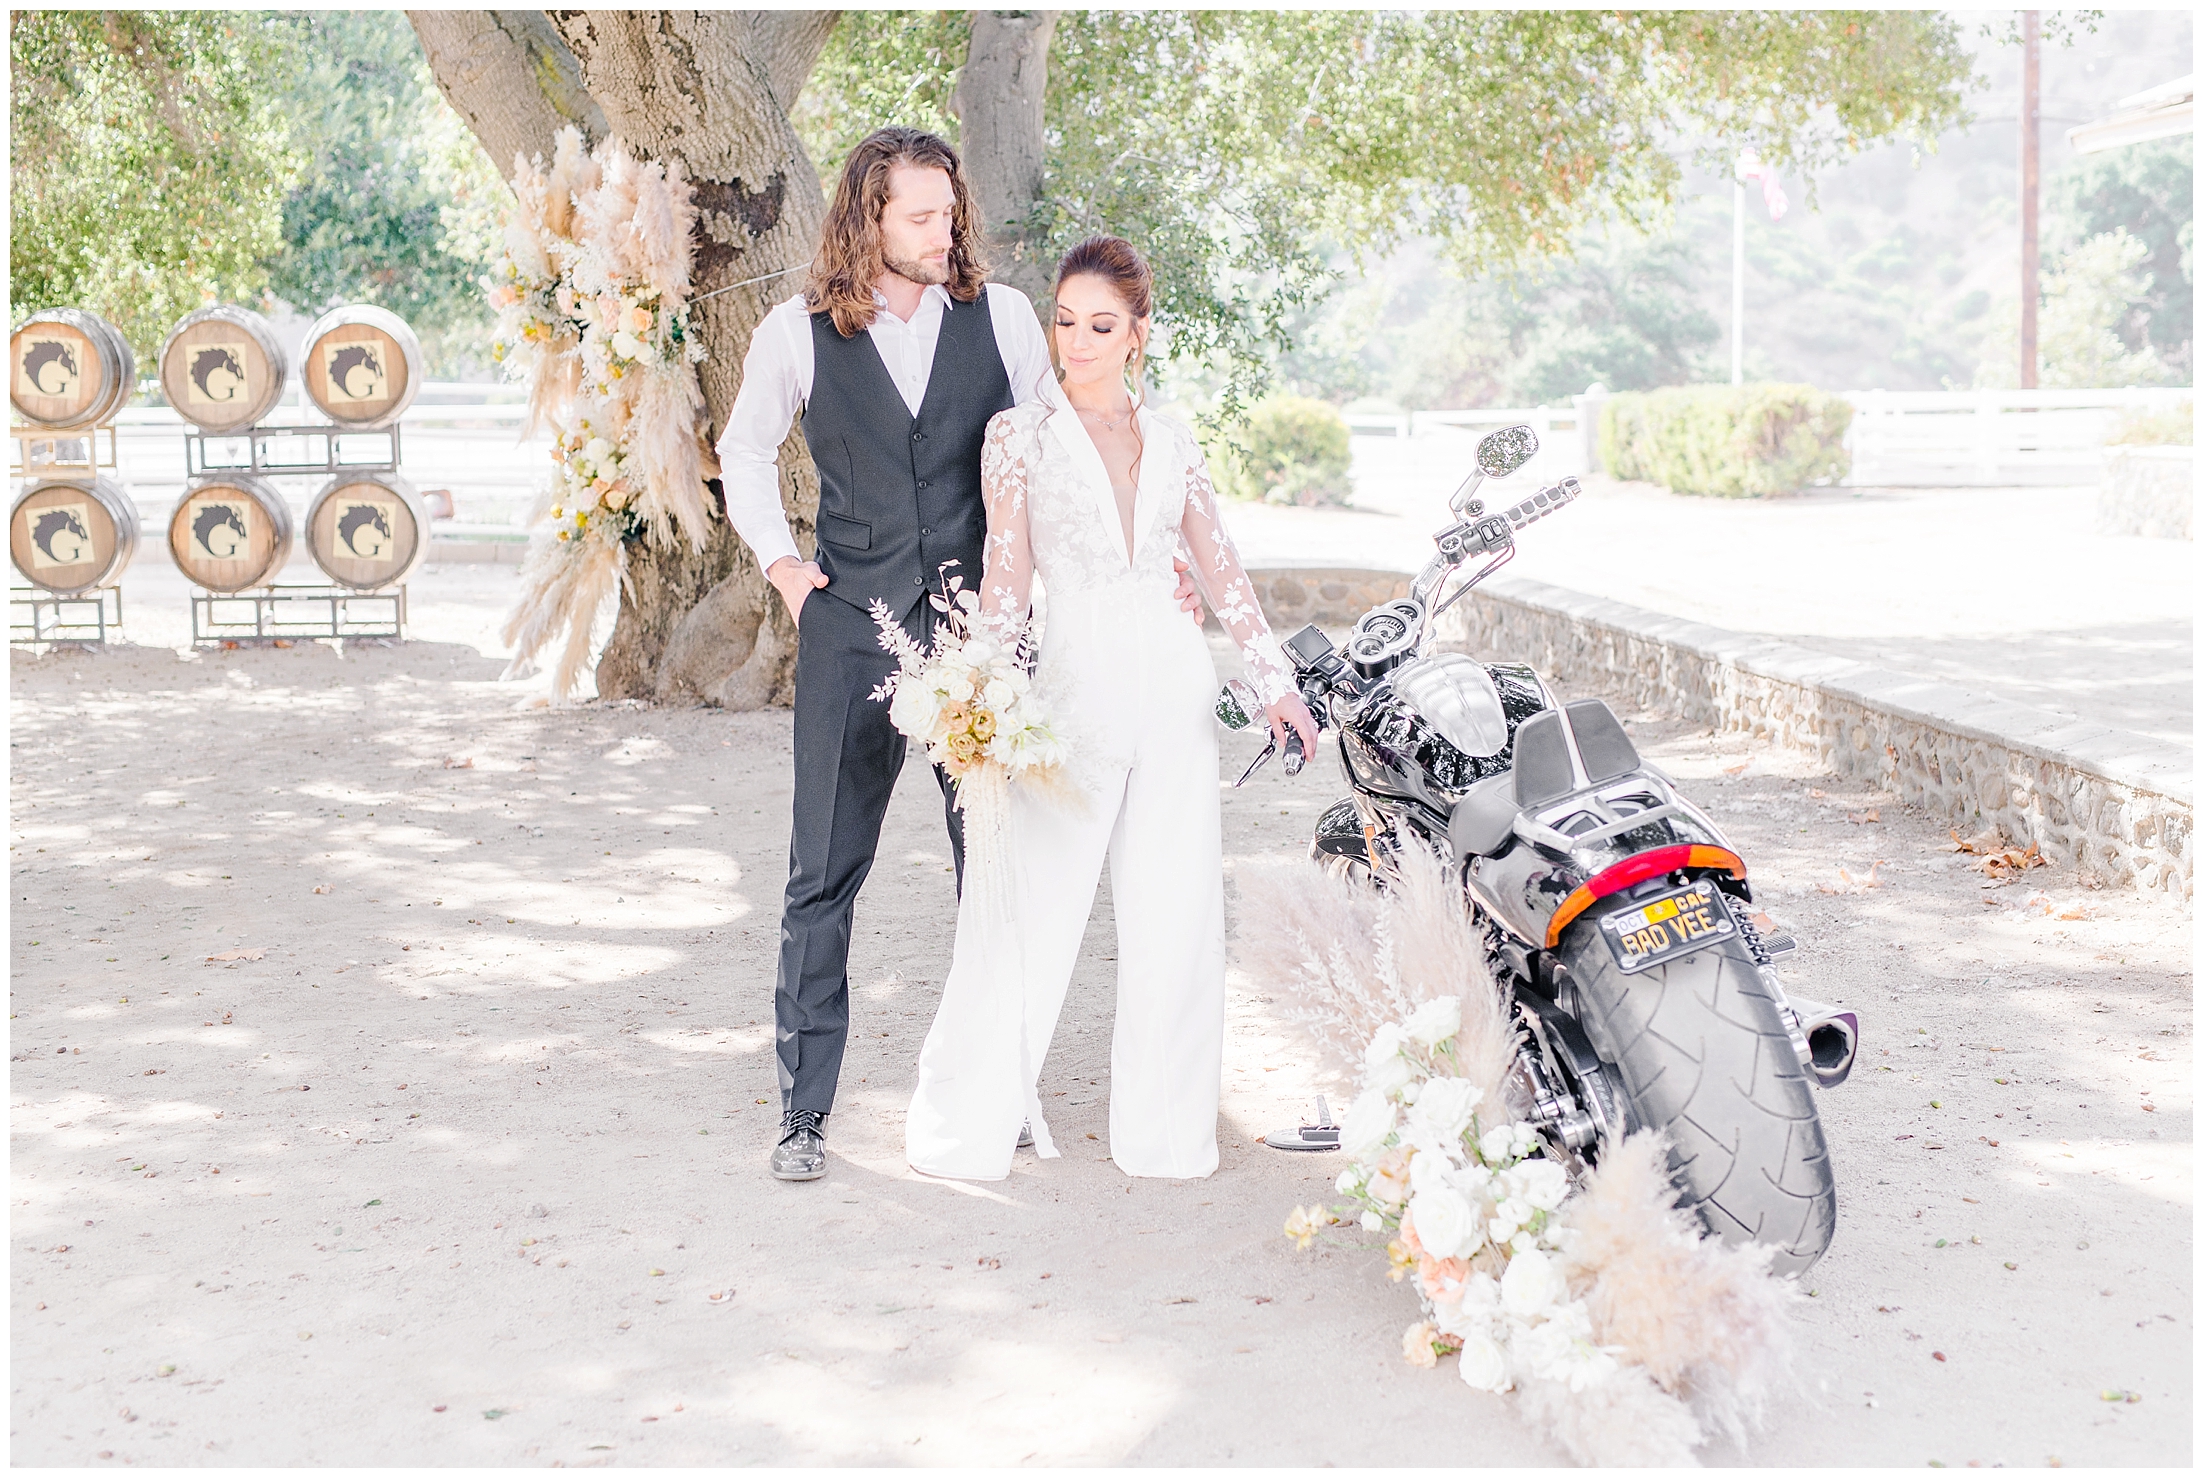 Bride and Groom next to a motorcycle